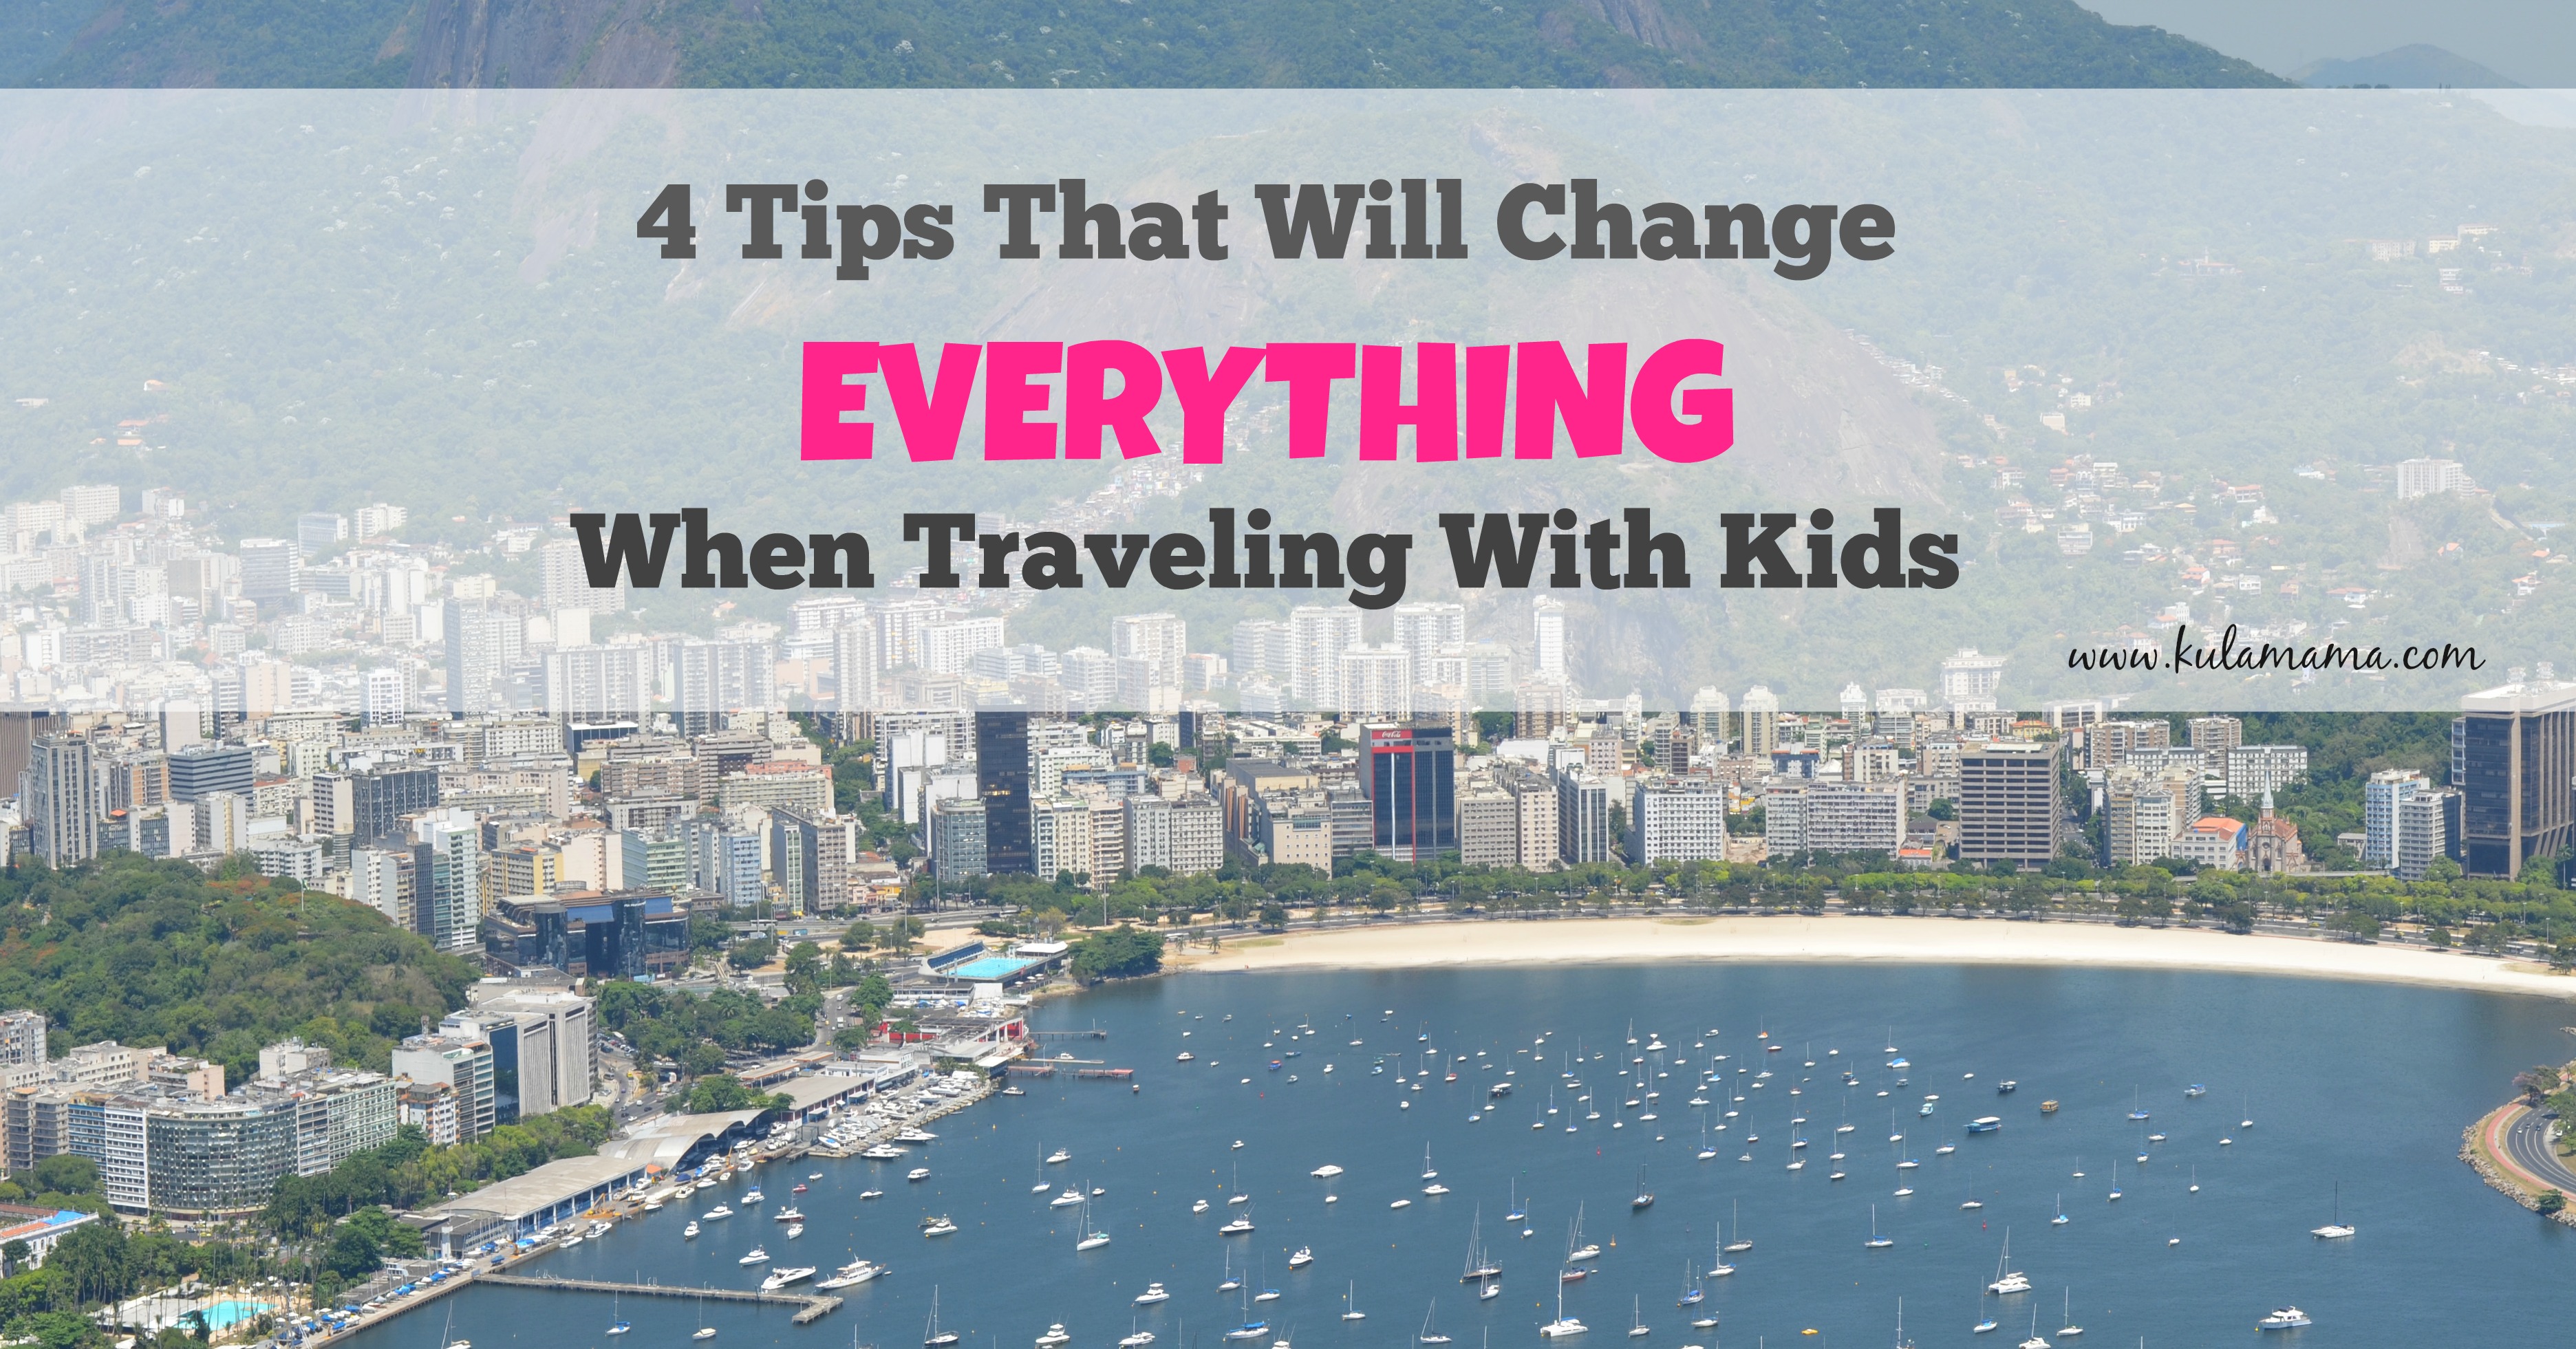 4 Tips That Will Change EVERYTHING When Traveling With KIDS.